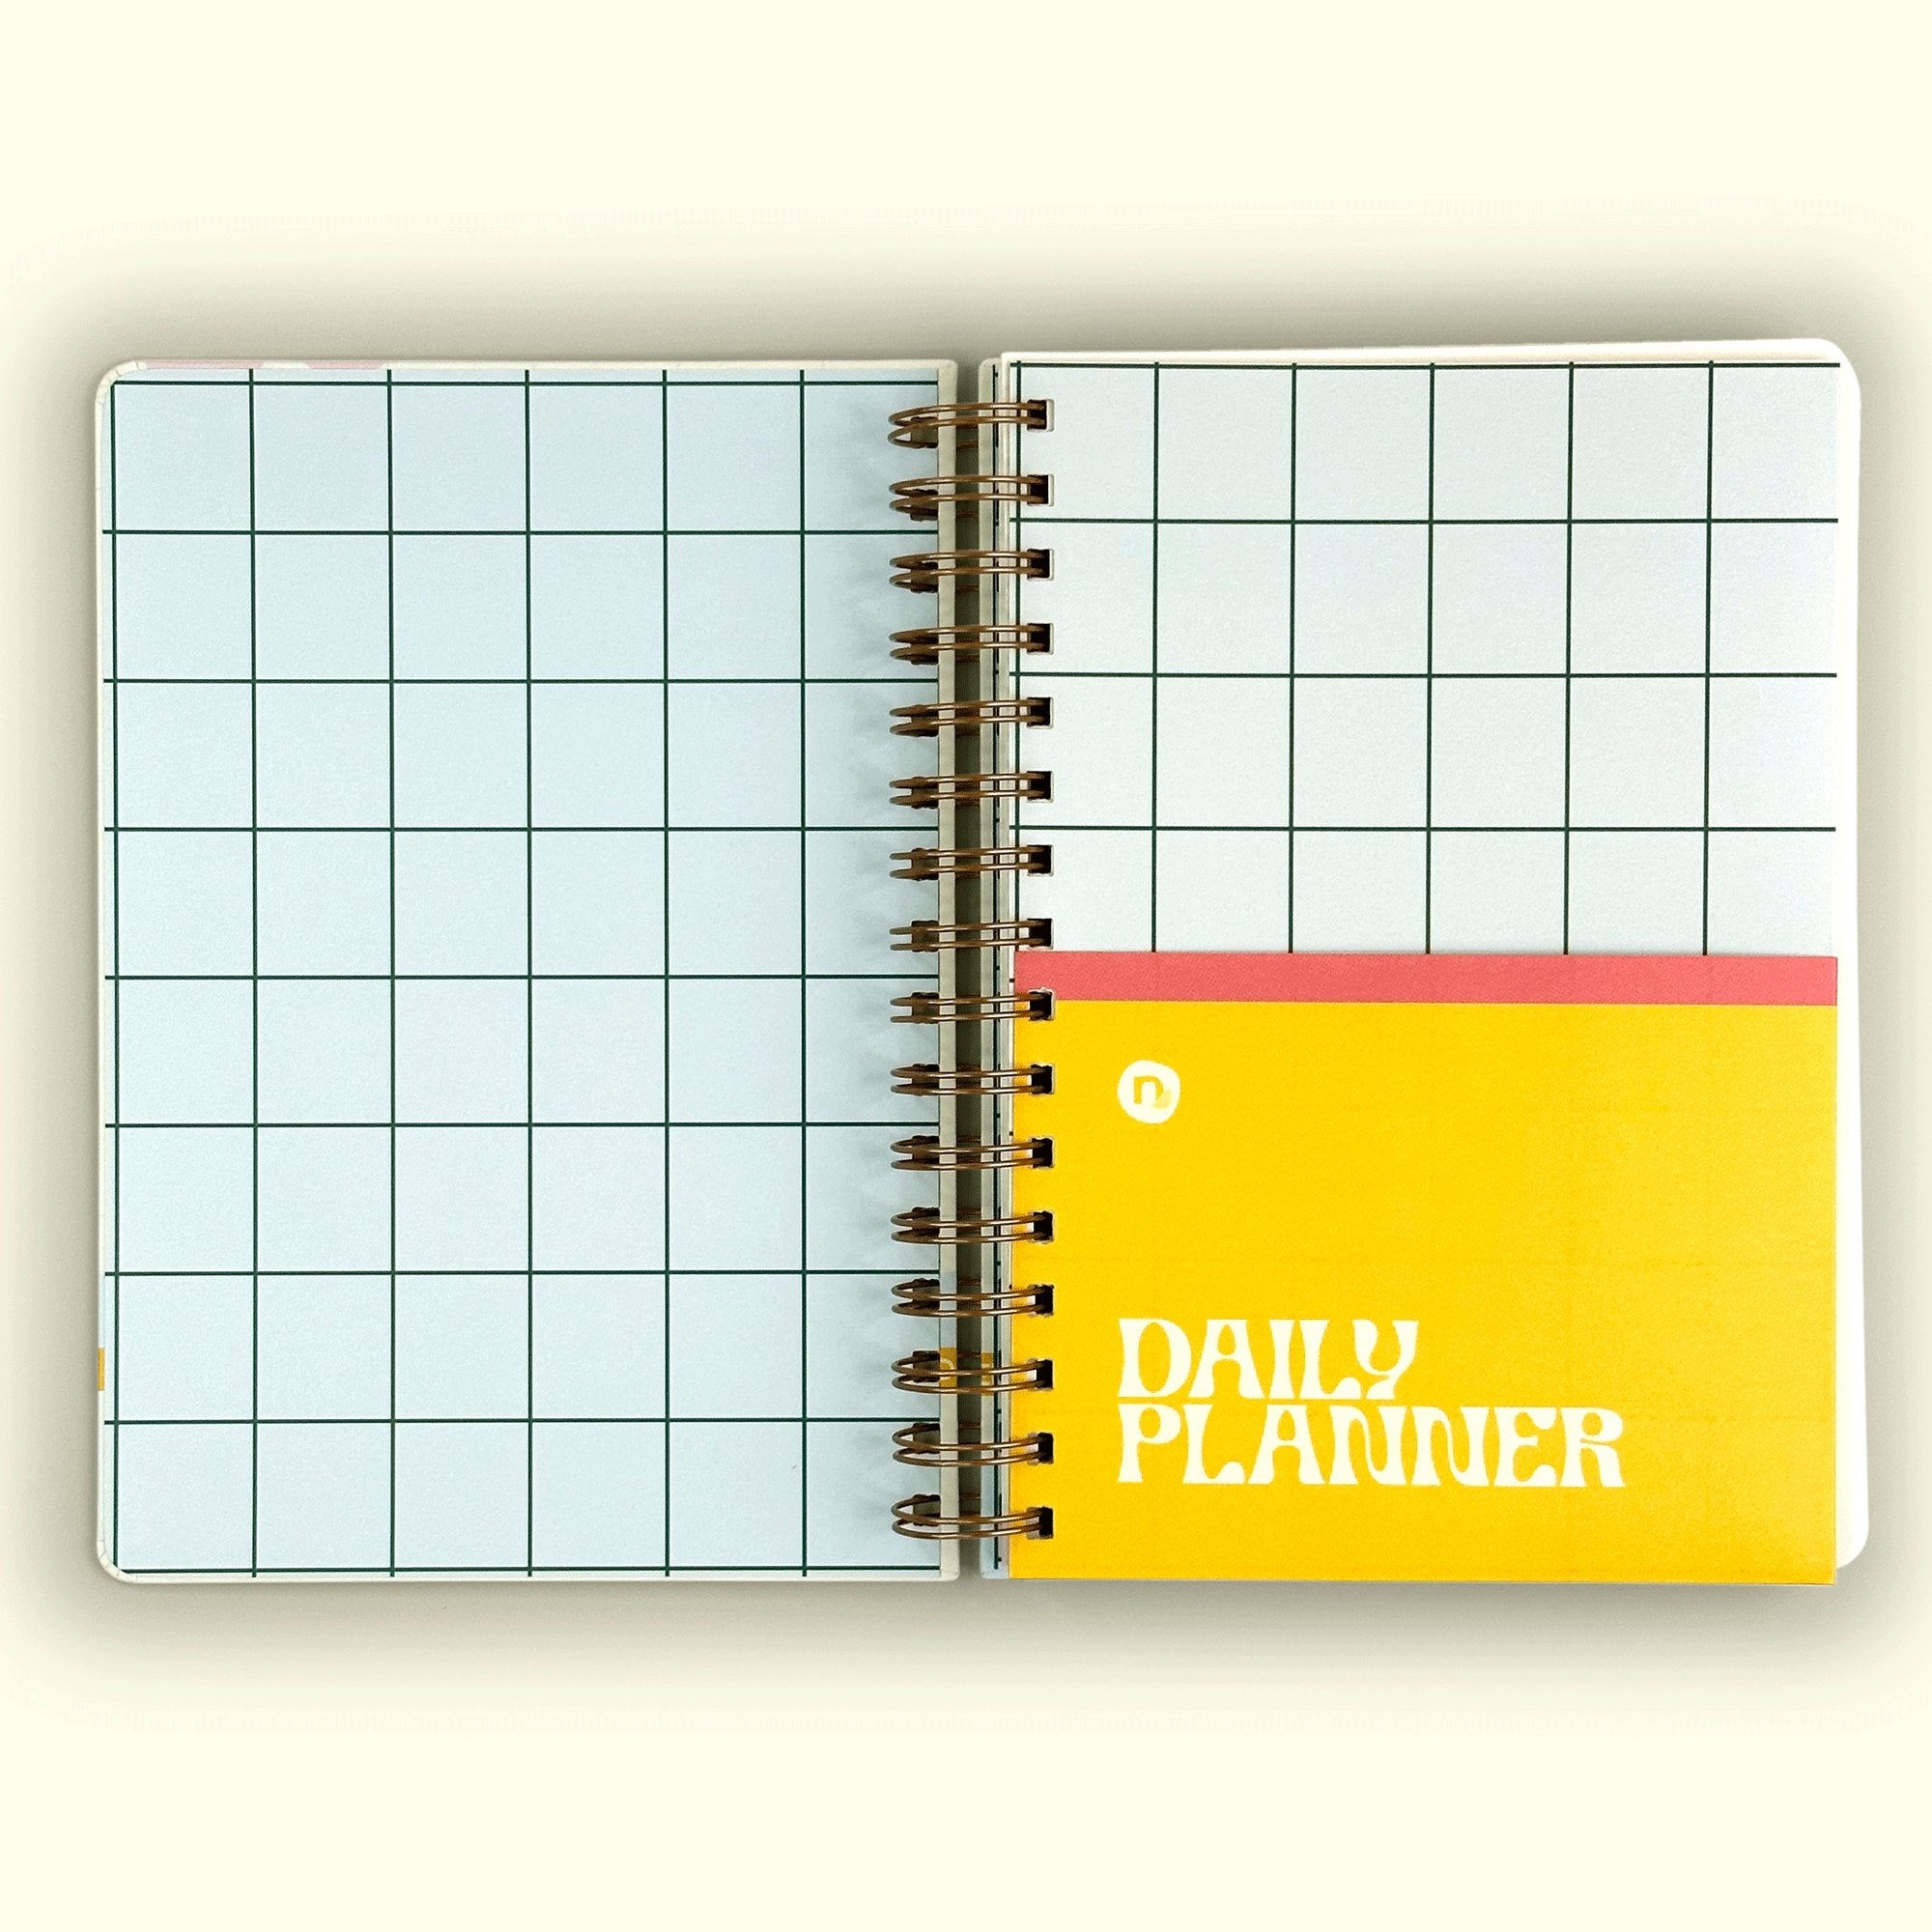 Daily Planner | Doing my best (CA) - Notcoy